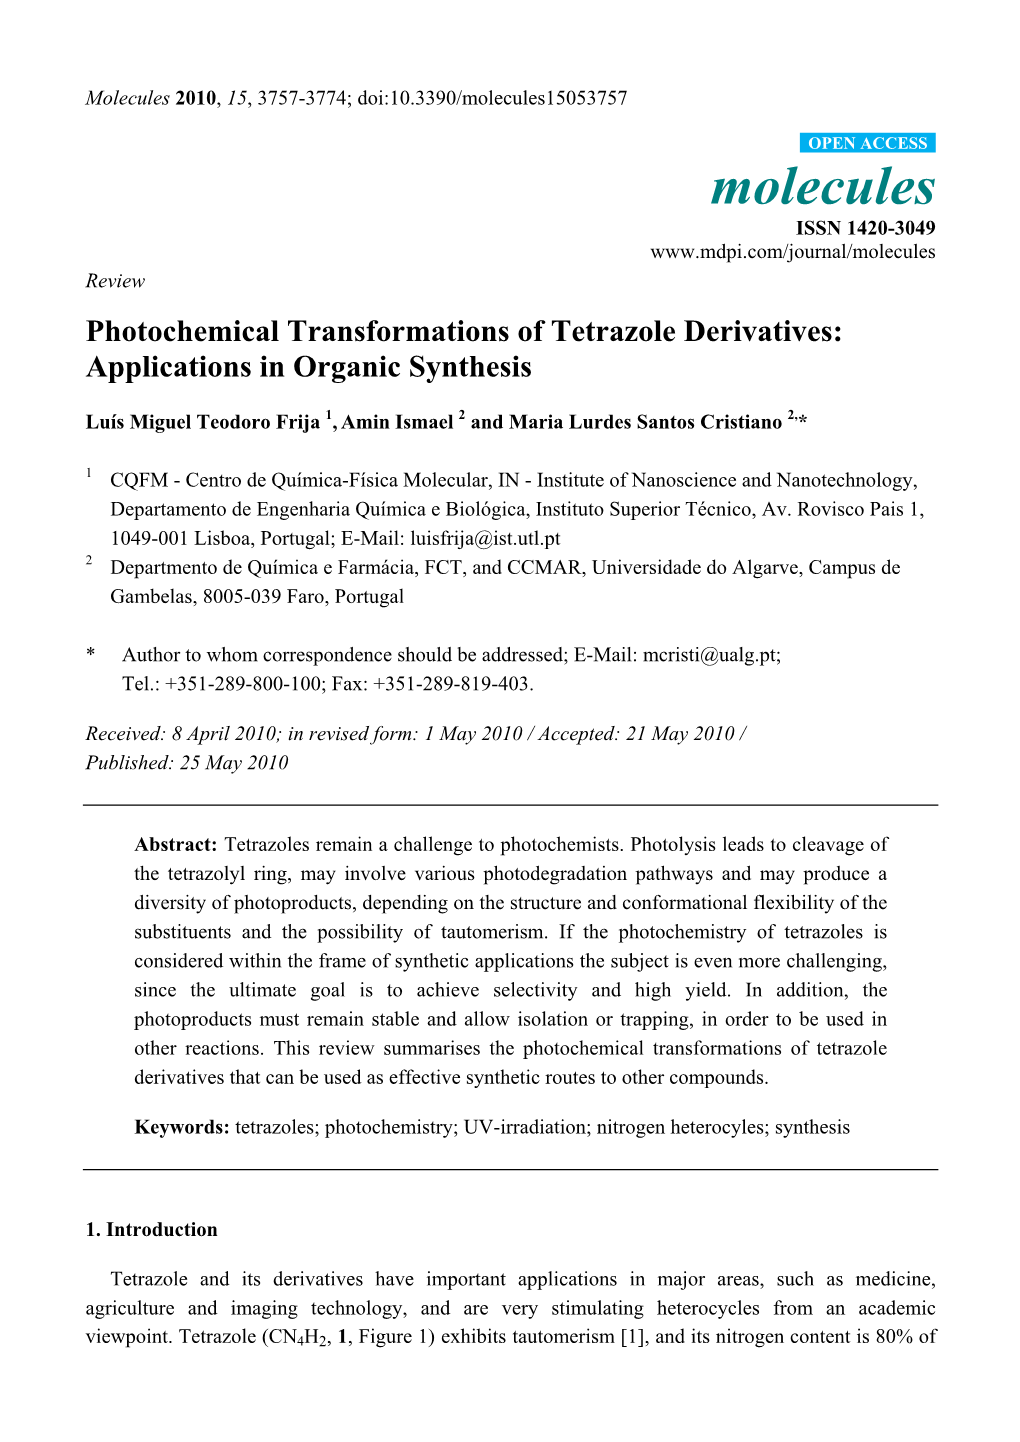 Photochemical Transformations of Tetrazole Derivatives: Applications in Organic Synthesis